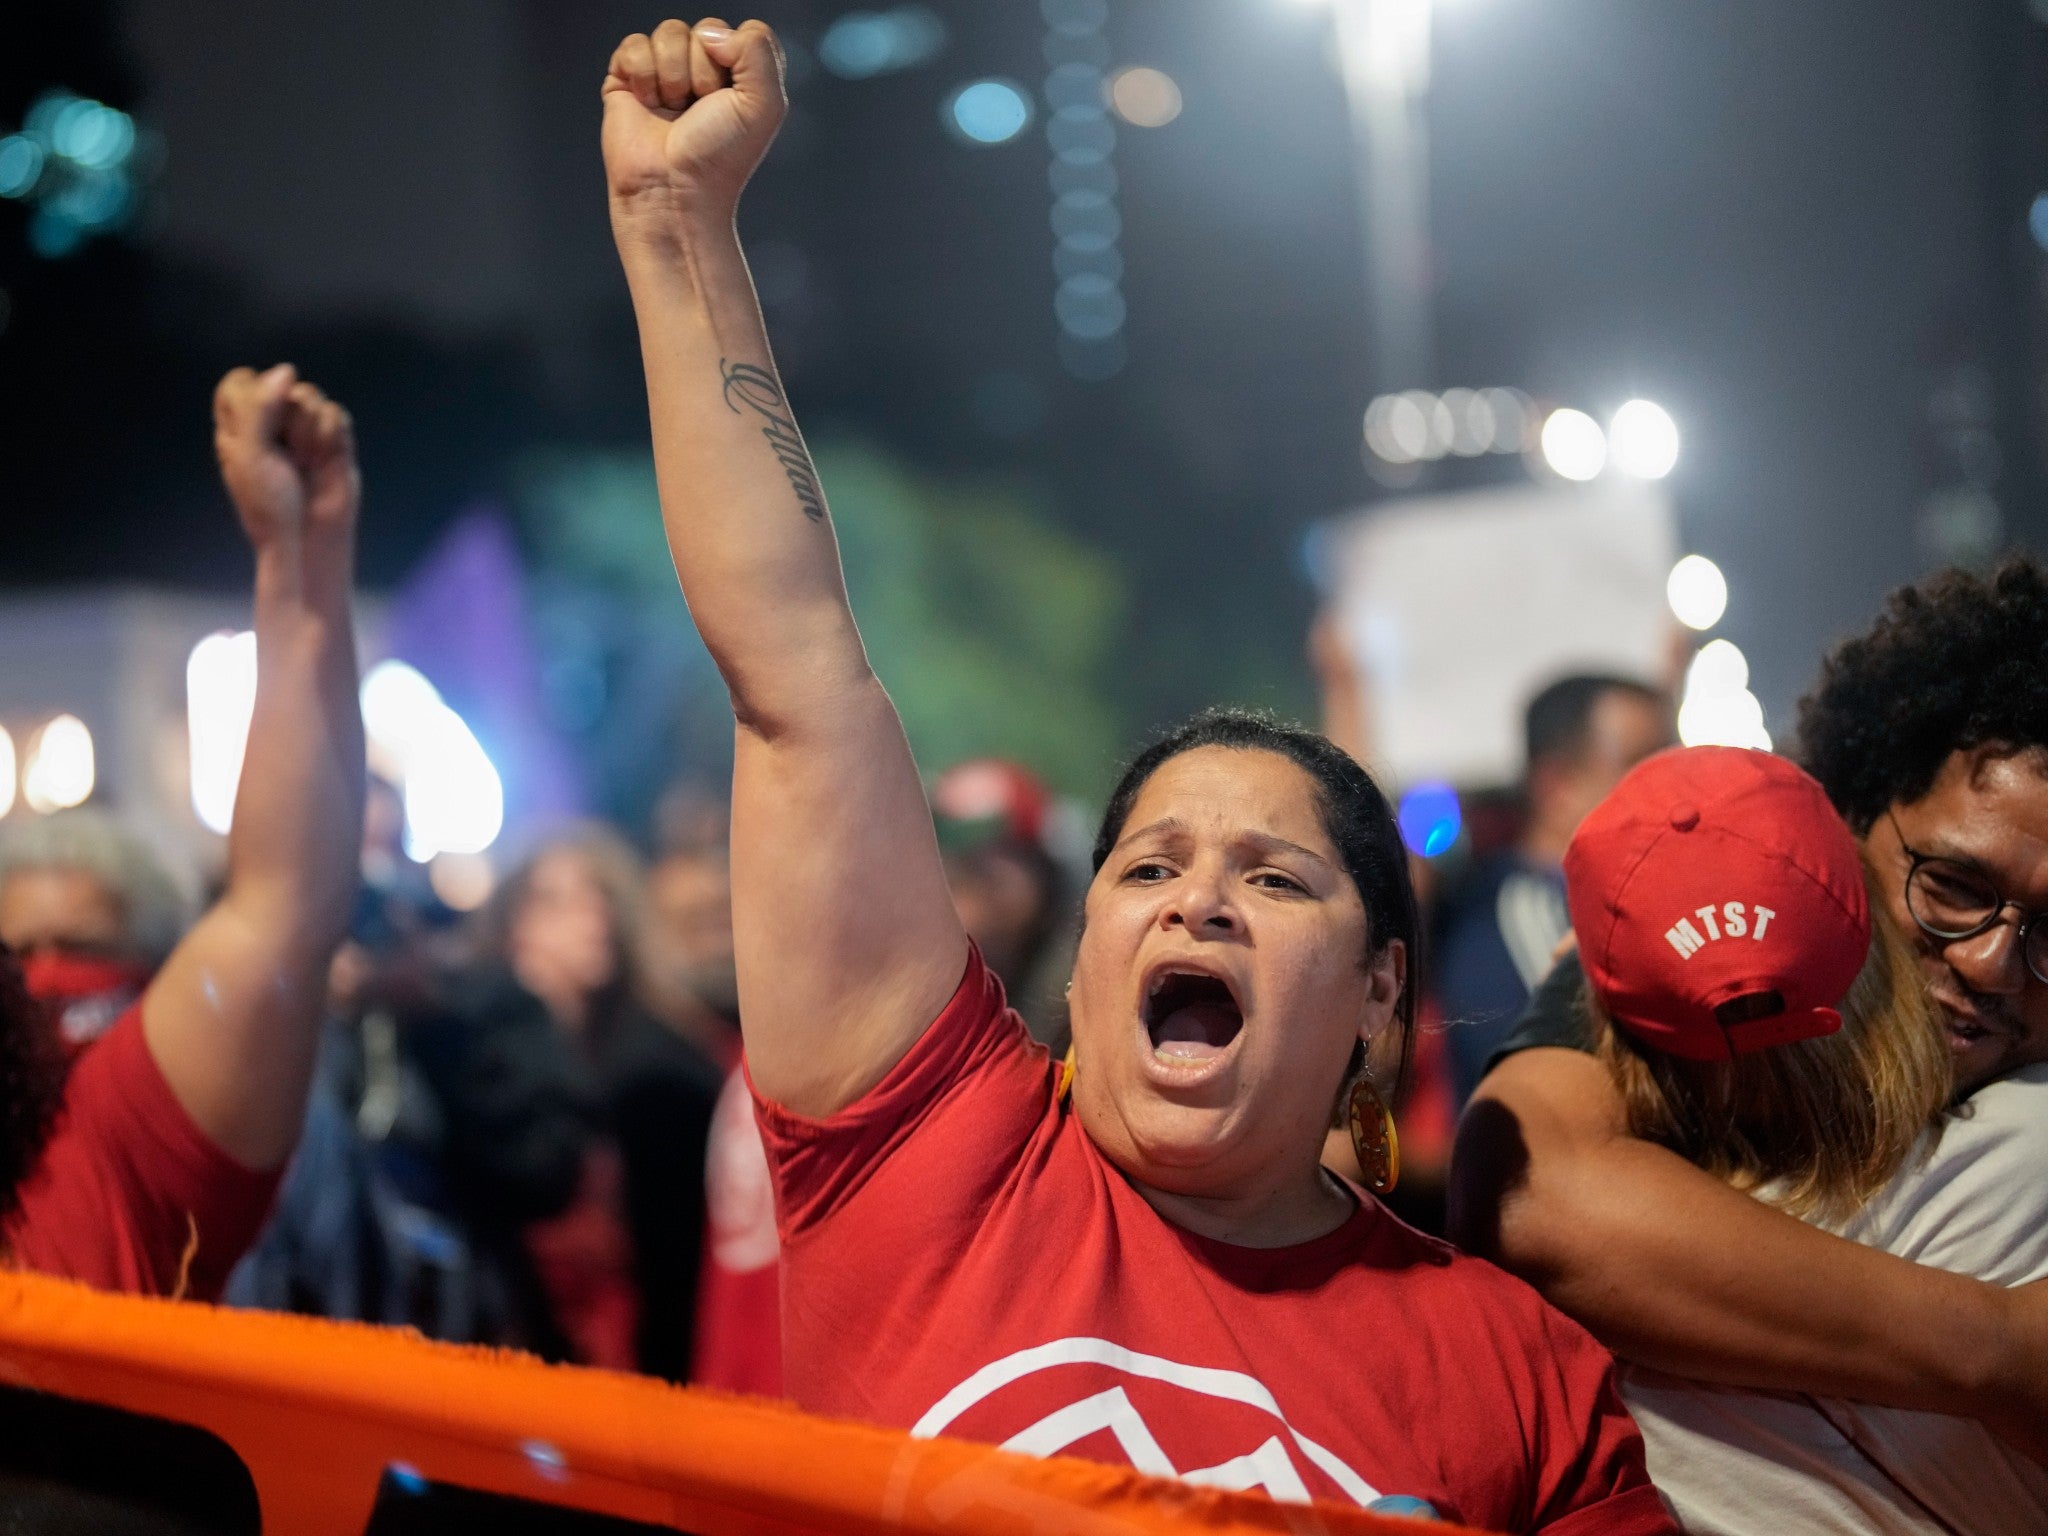 Demonstrators shout slogans against Brazilian former President Jair Bolsonaro during a protest calling for protection of the nation’s democracy in Sao Paulo